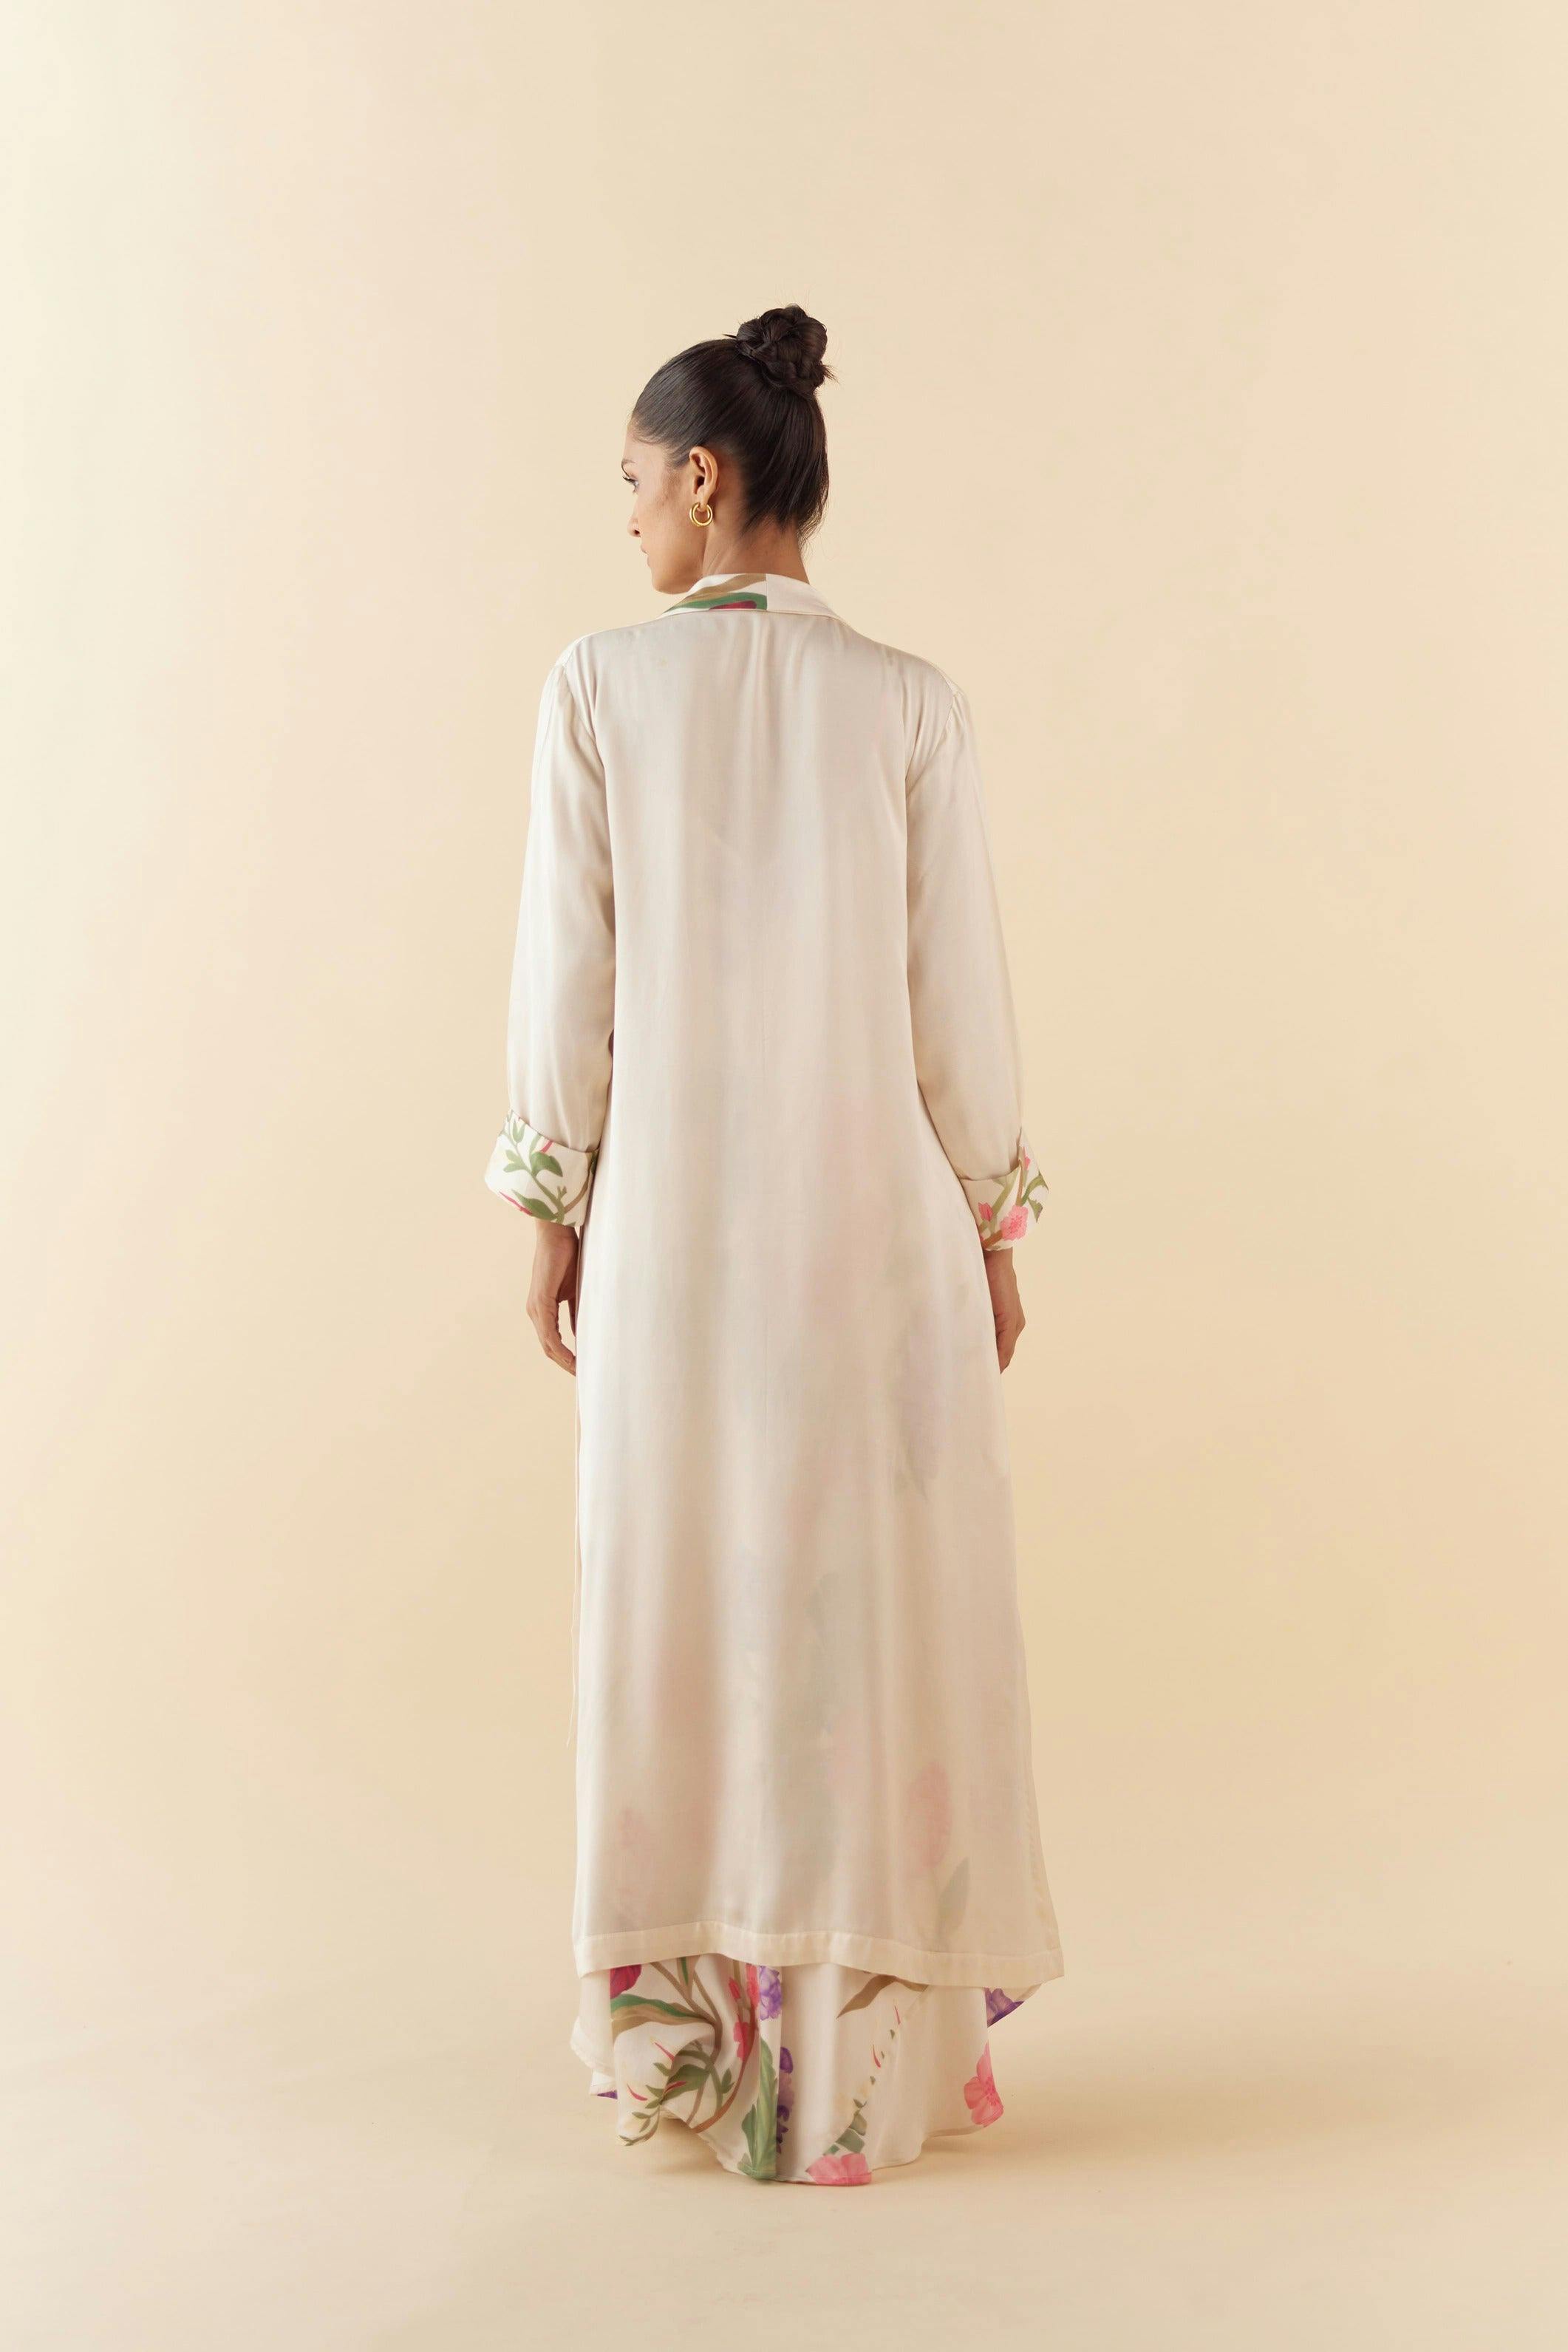 Thumbnail preview #1 for Lounge Robe in Ivory White